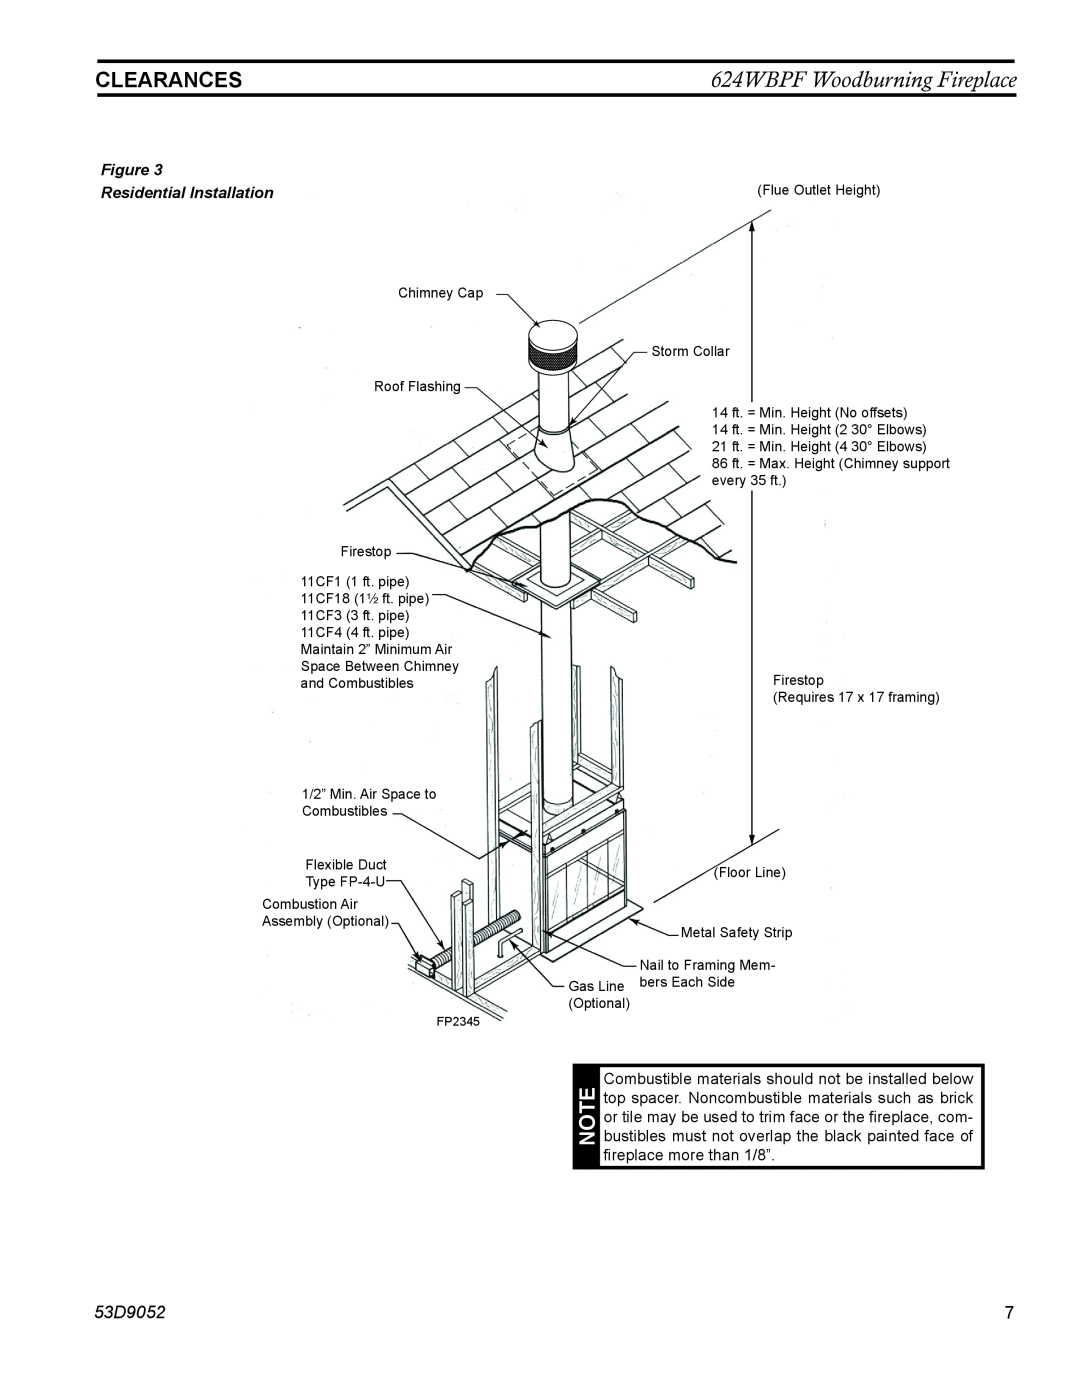 Monessen Hearth manual Clearances, 624WBPF Woodburning Fireplace, 53D9052, Figure Residential Installation 